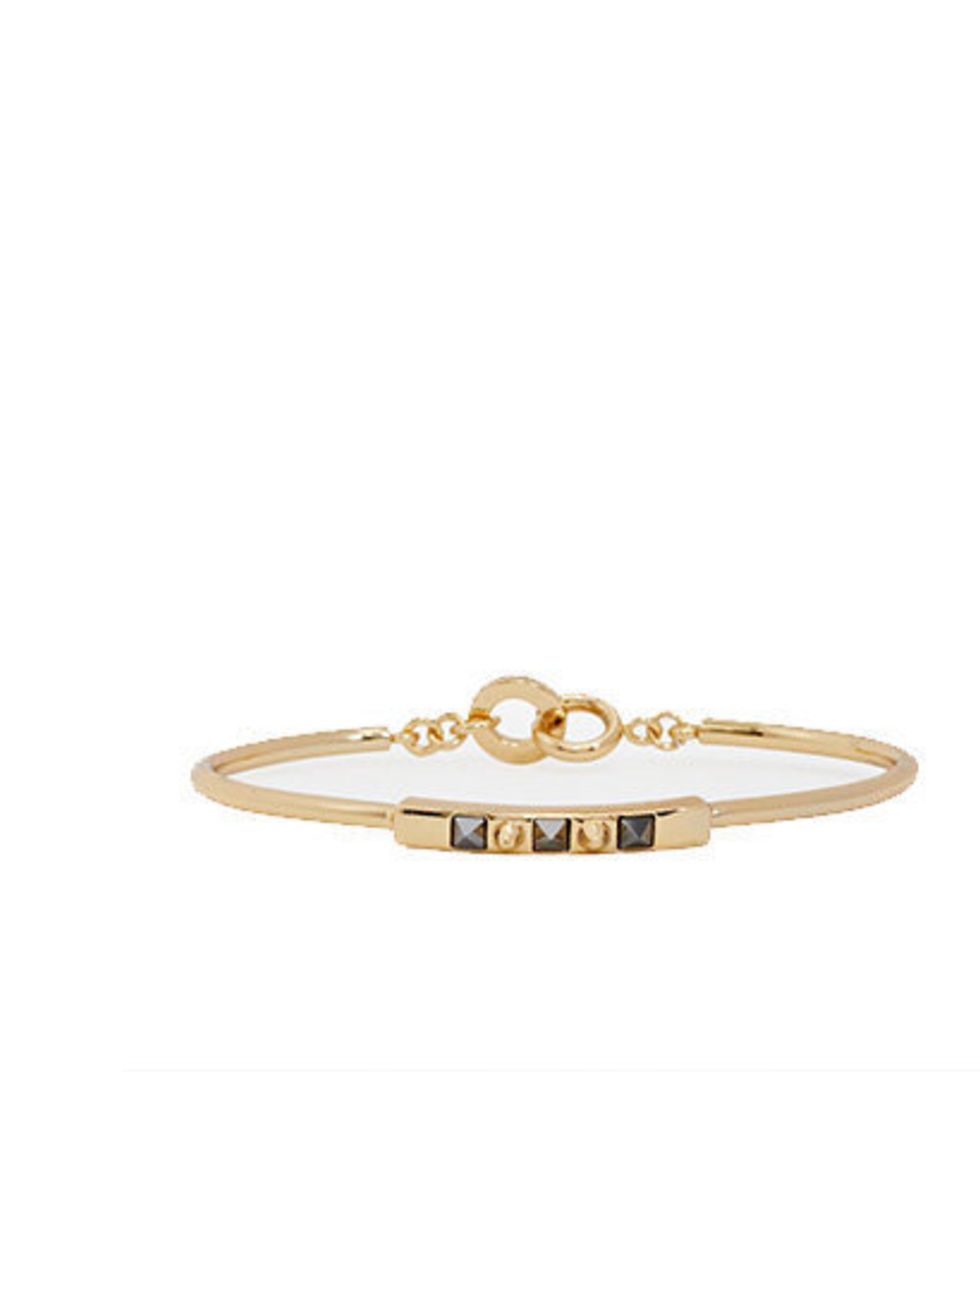 French Connection gold tone bracelet, £50